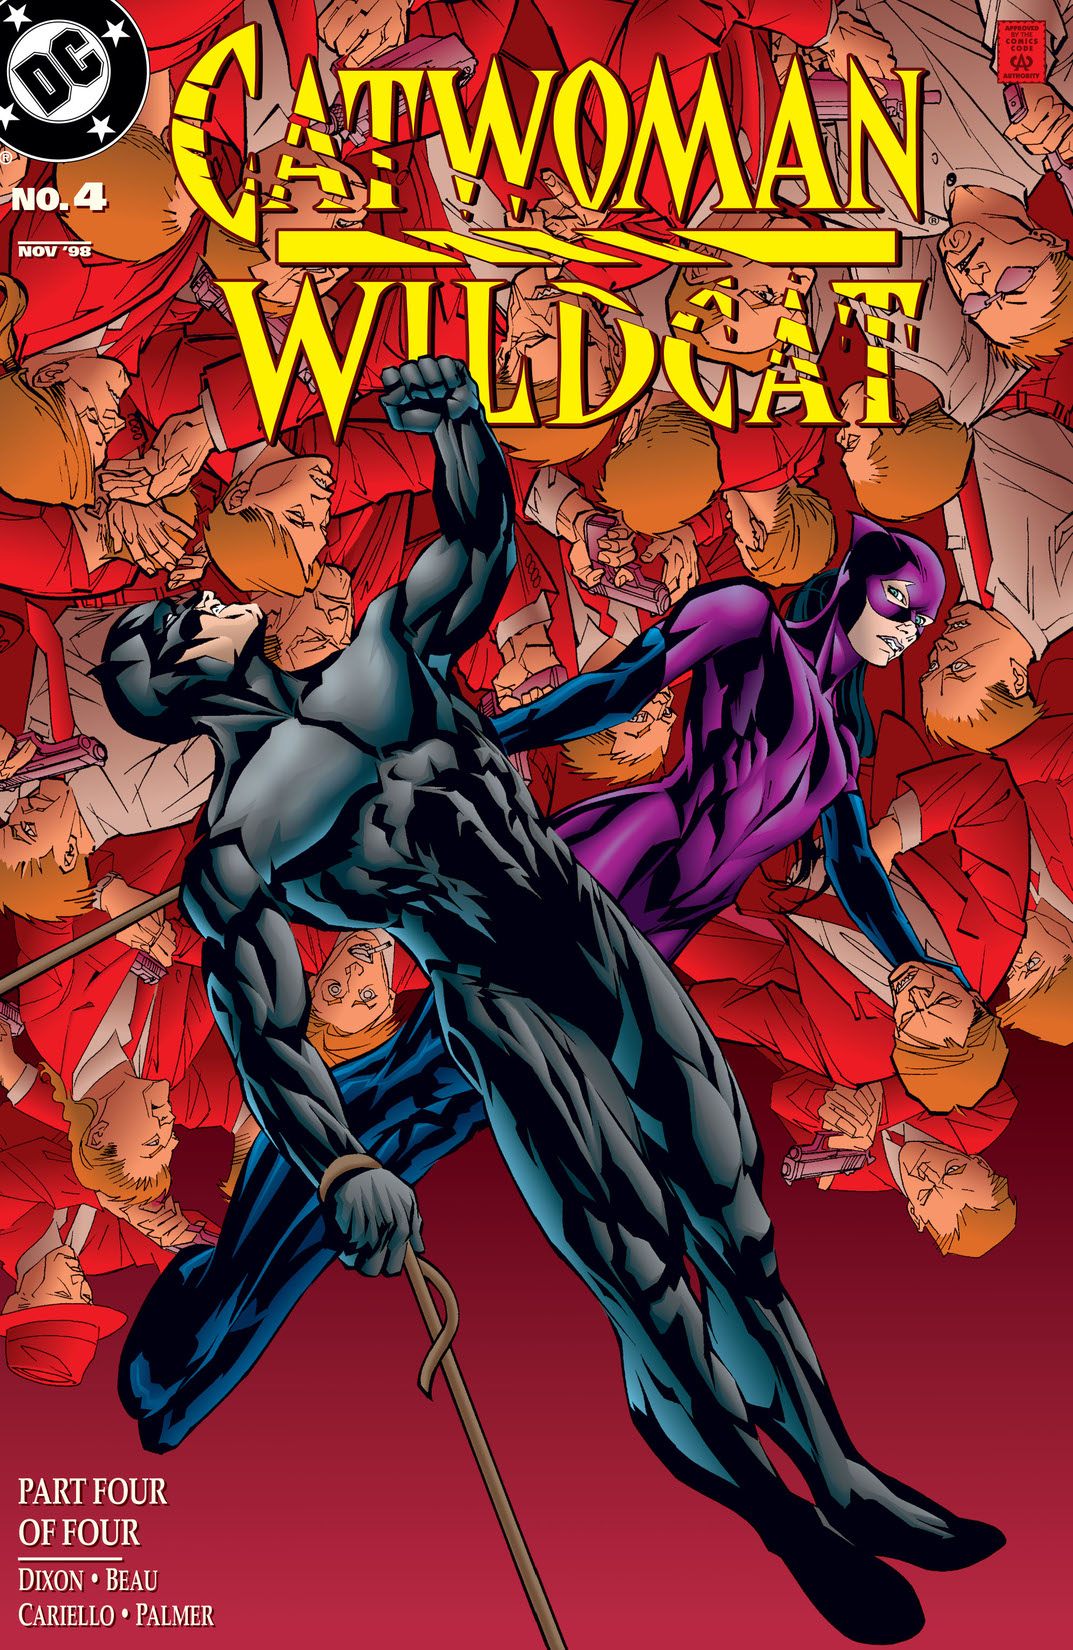 Catwoman/Wildcat #4 preview images